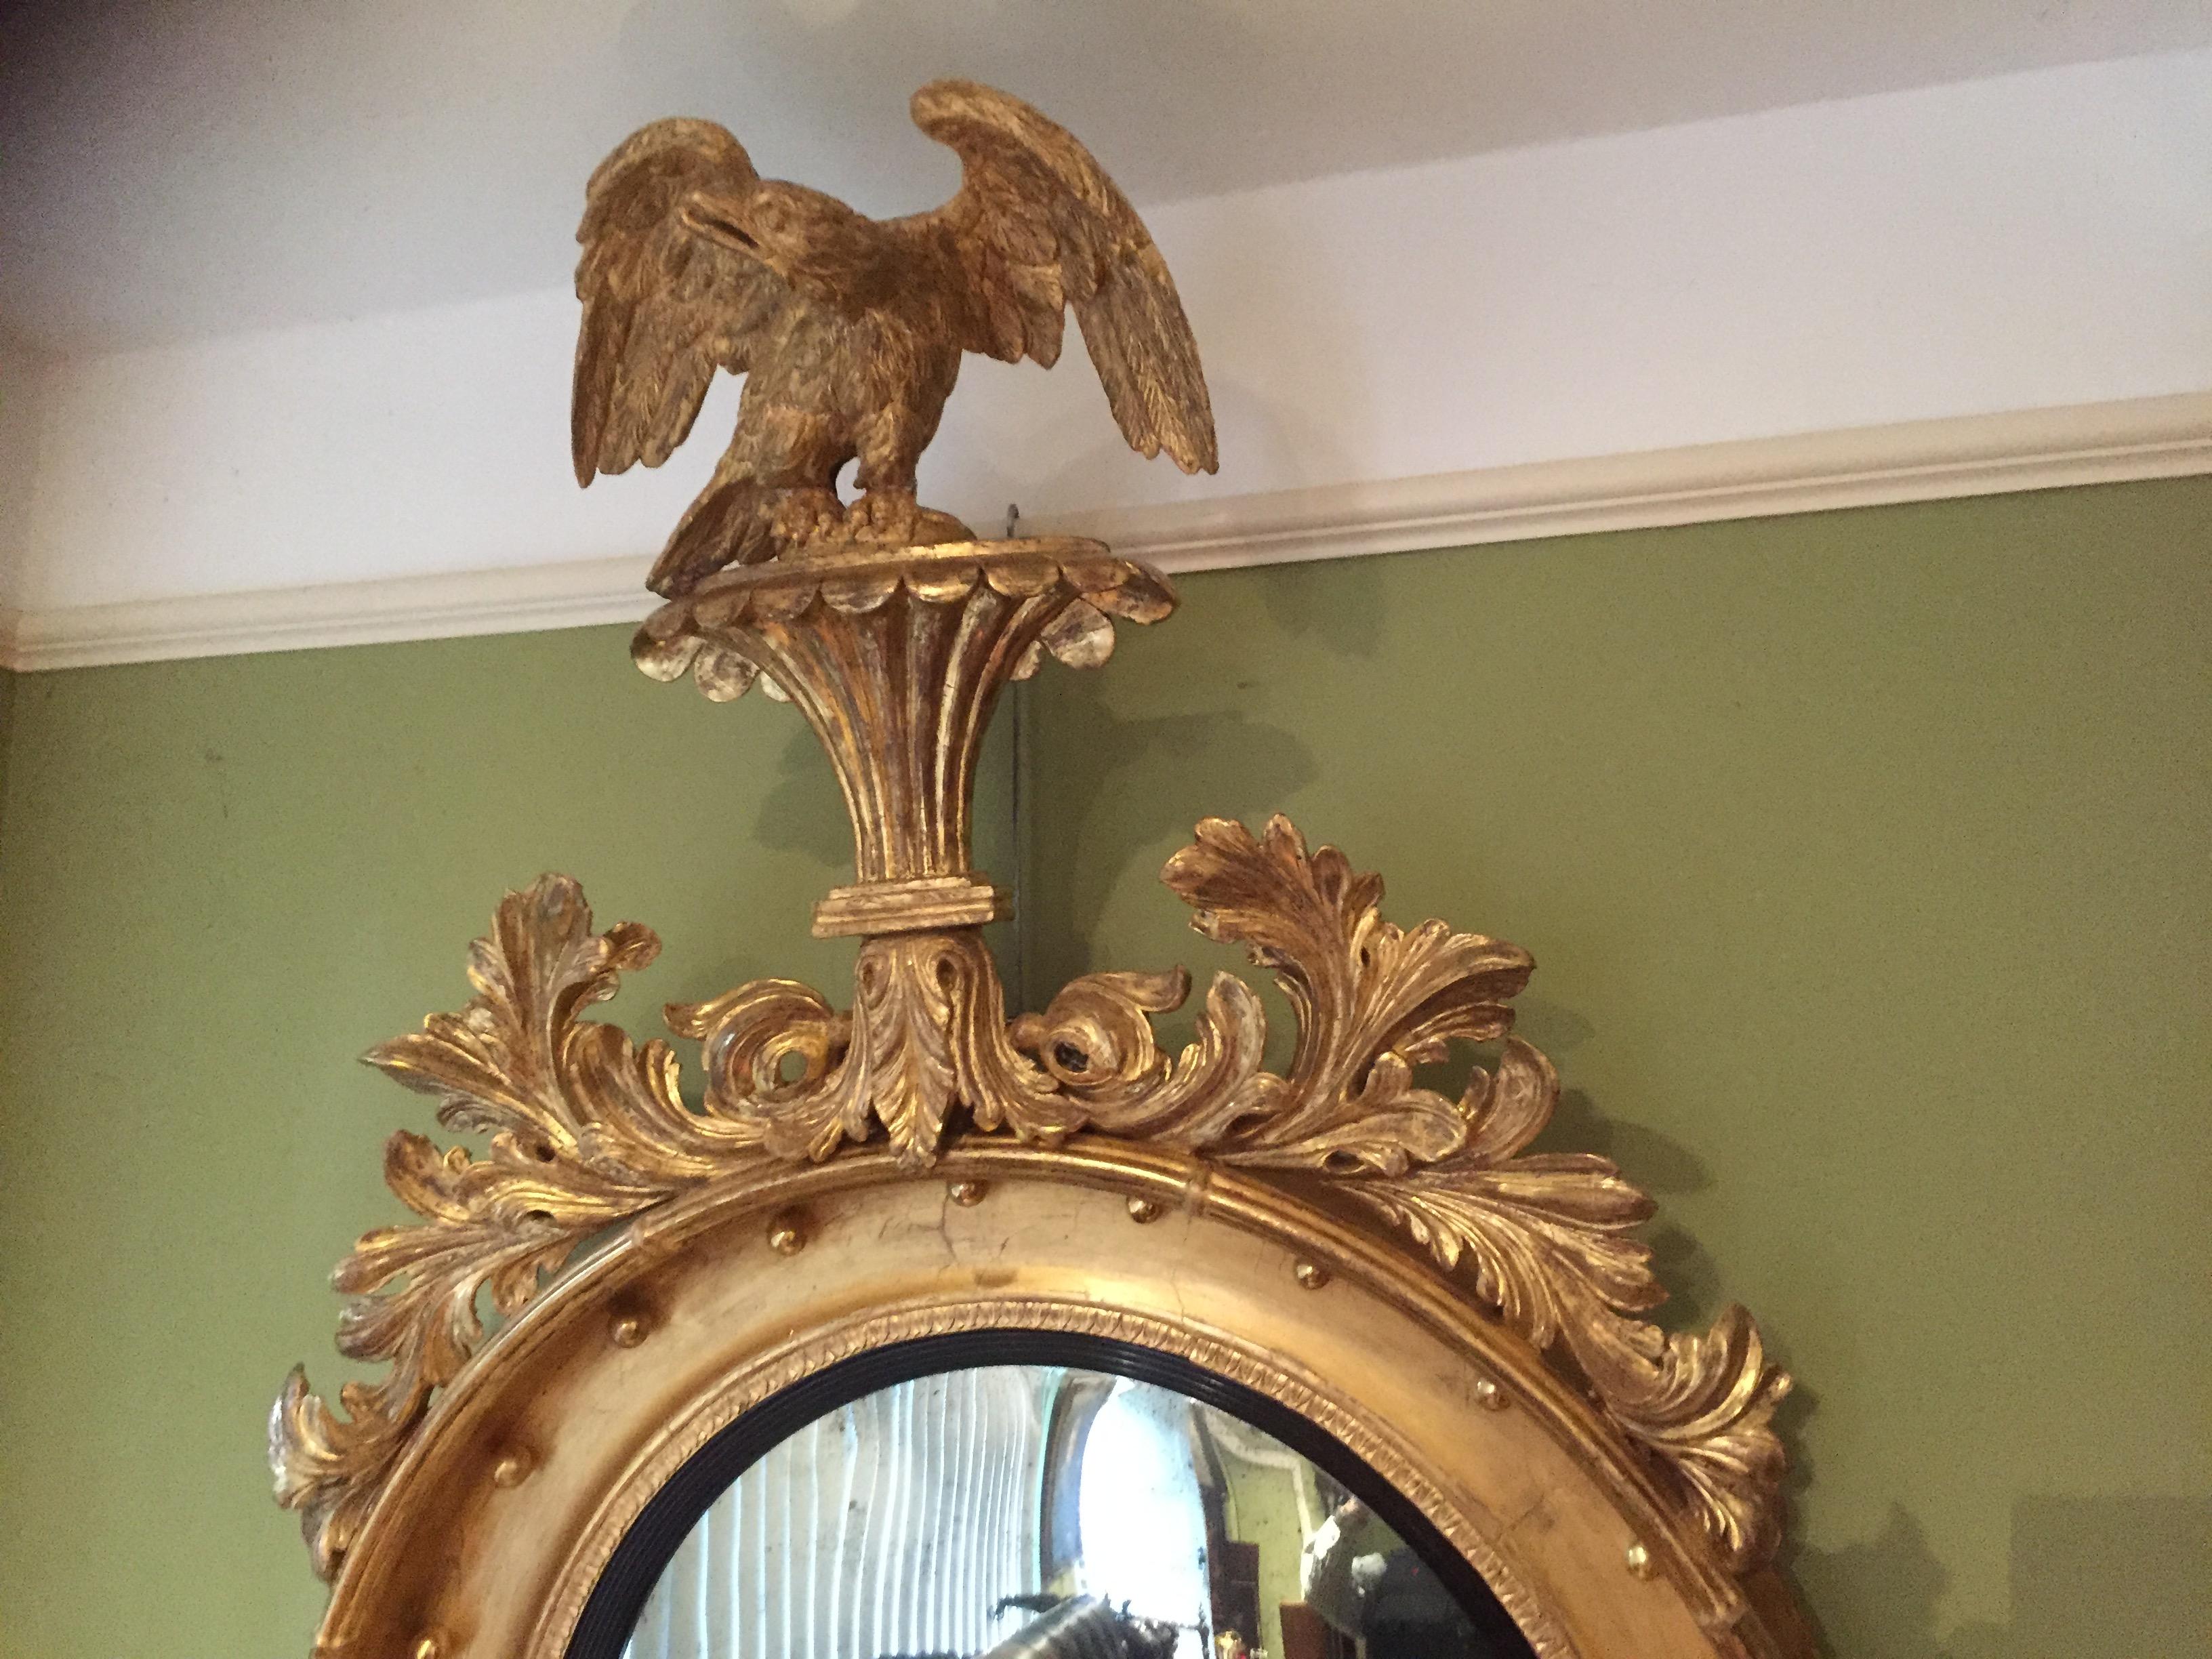 The carved eagle stands on a fluted platform above a carved leaf decorated applied mount. The circular giltwood and gesso frame with an old mercury plate and ebonized reeded mount sits above a crisply carved decoration.